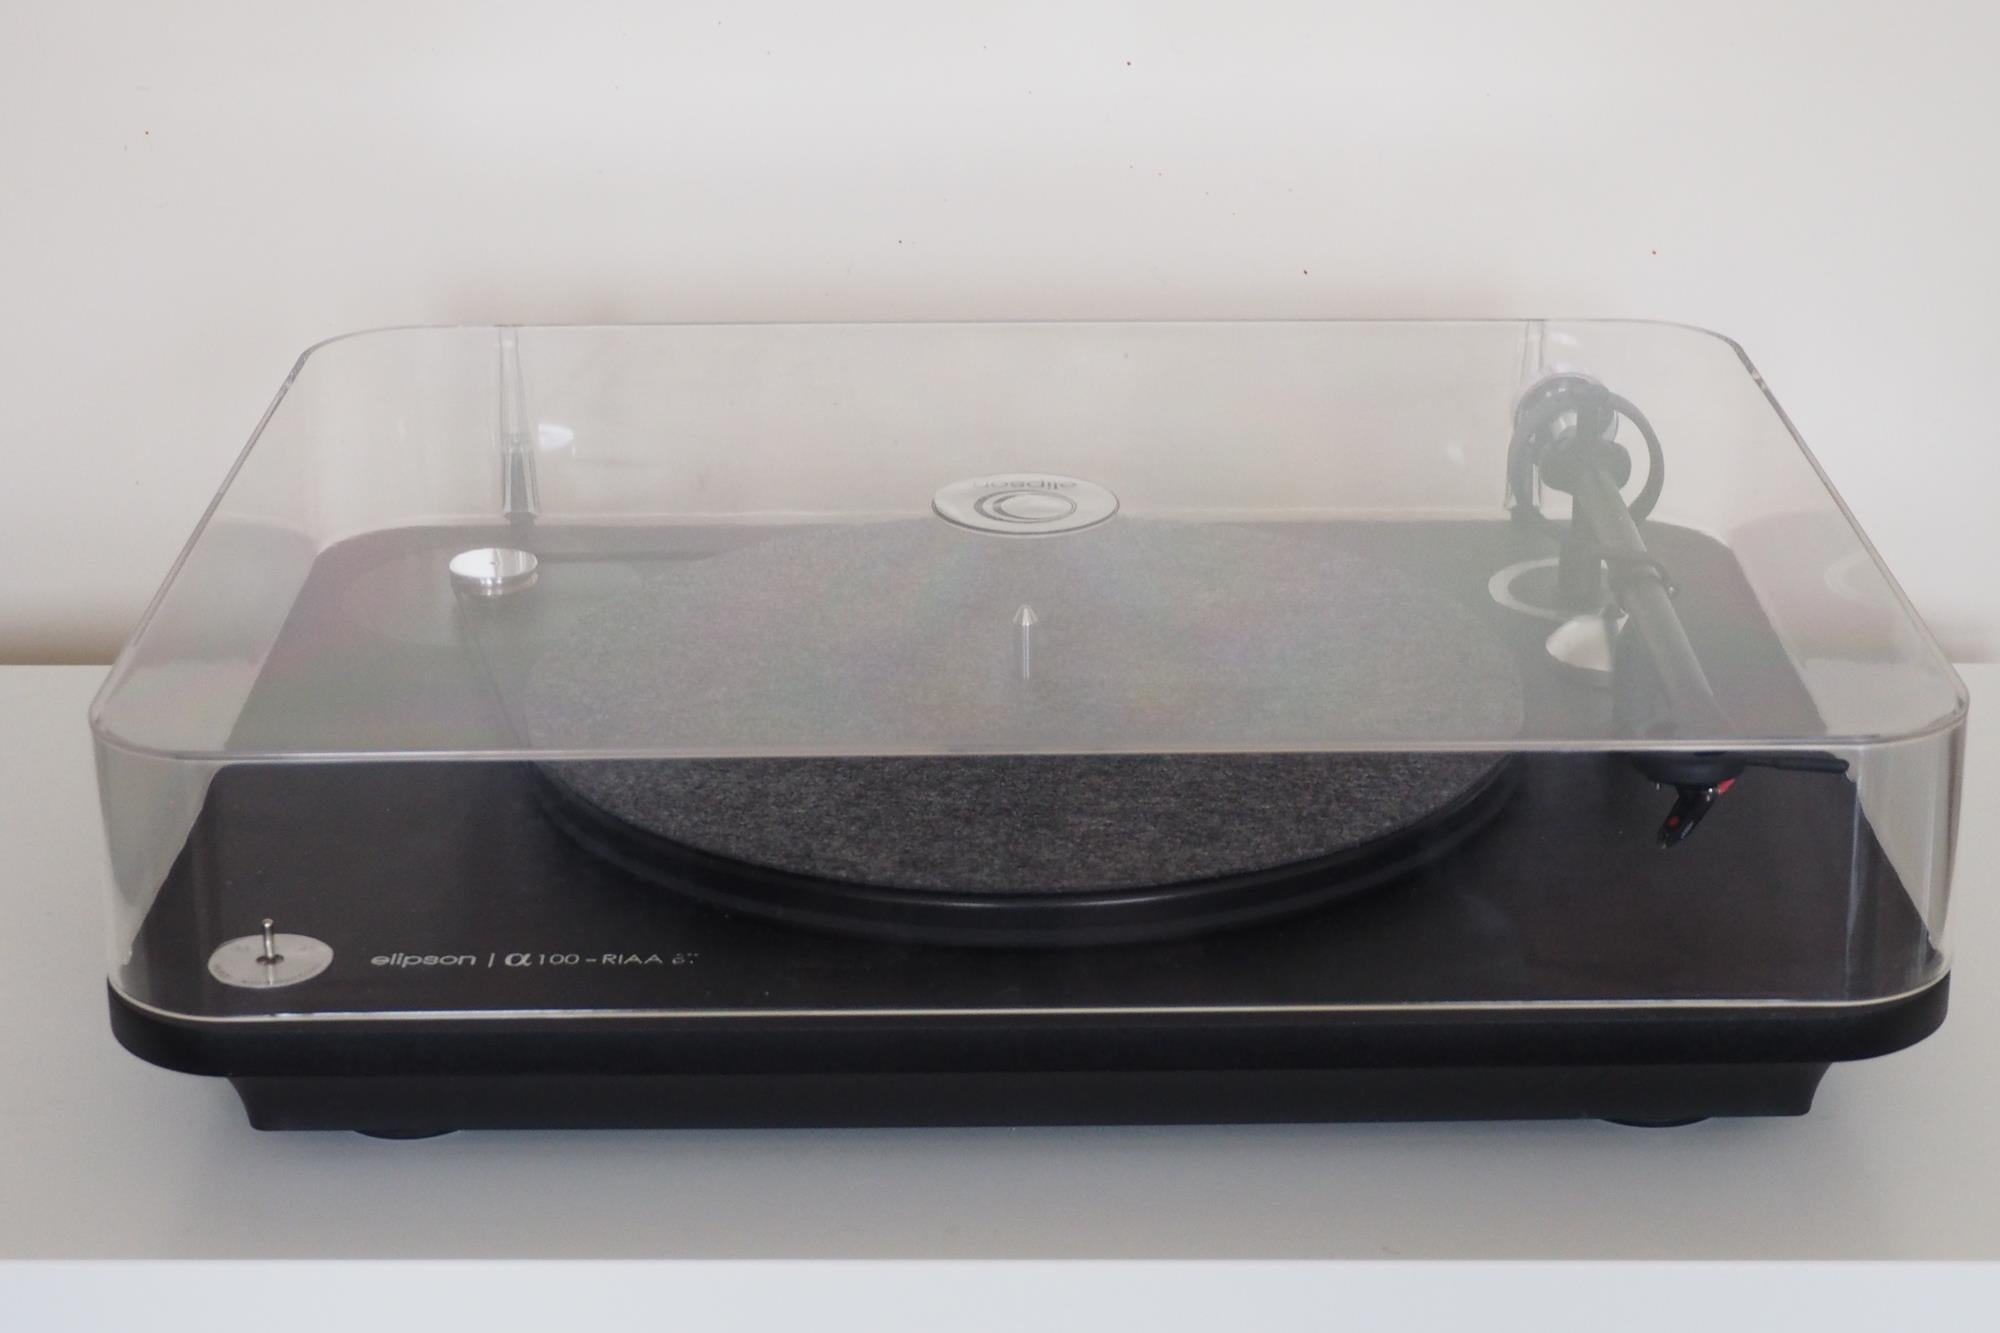 Elipson Alpha 100 RIAA BT turntable with dust cover.